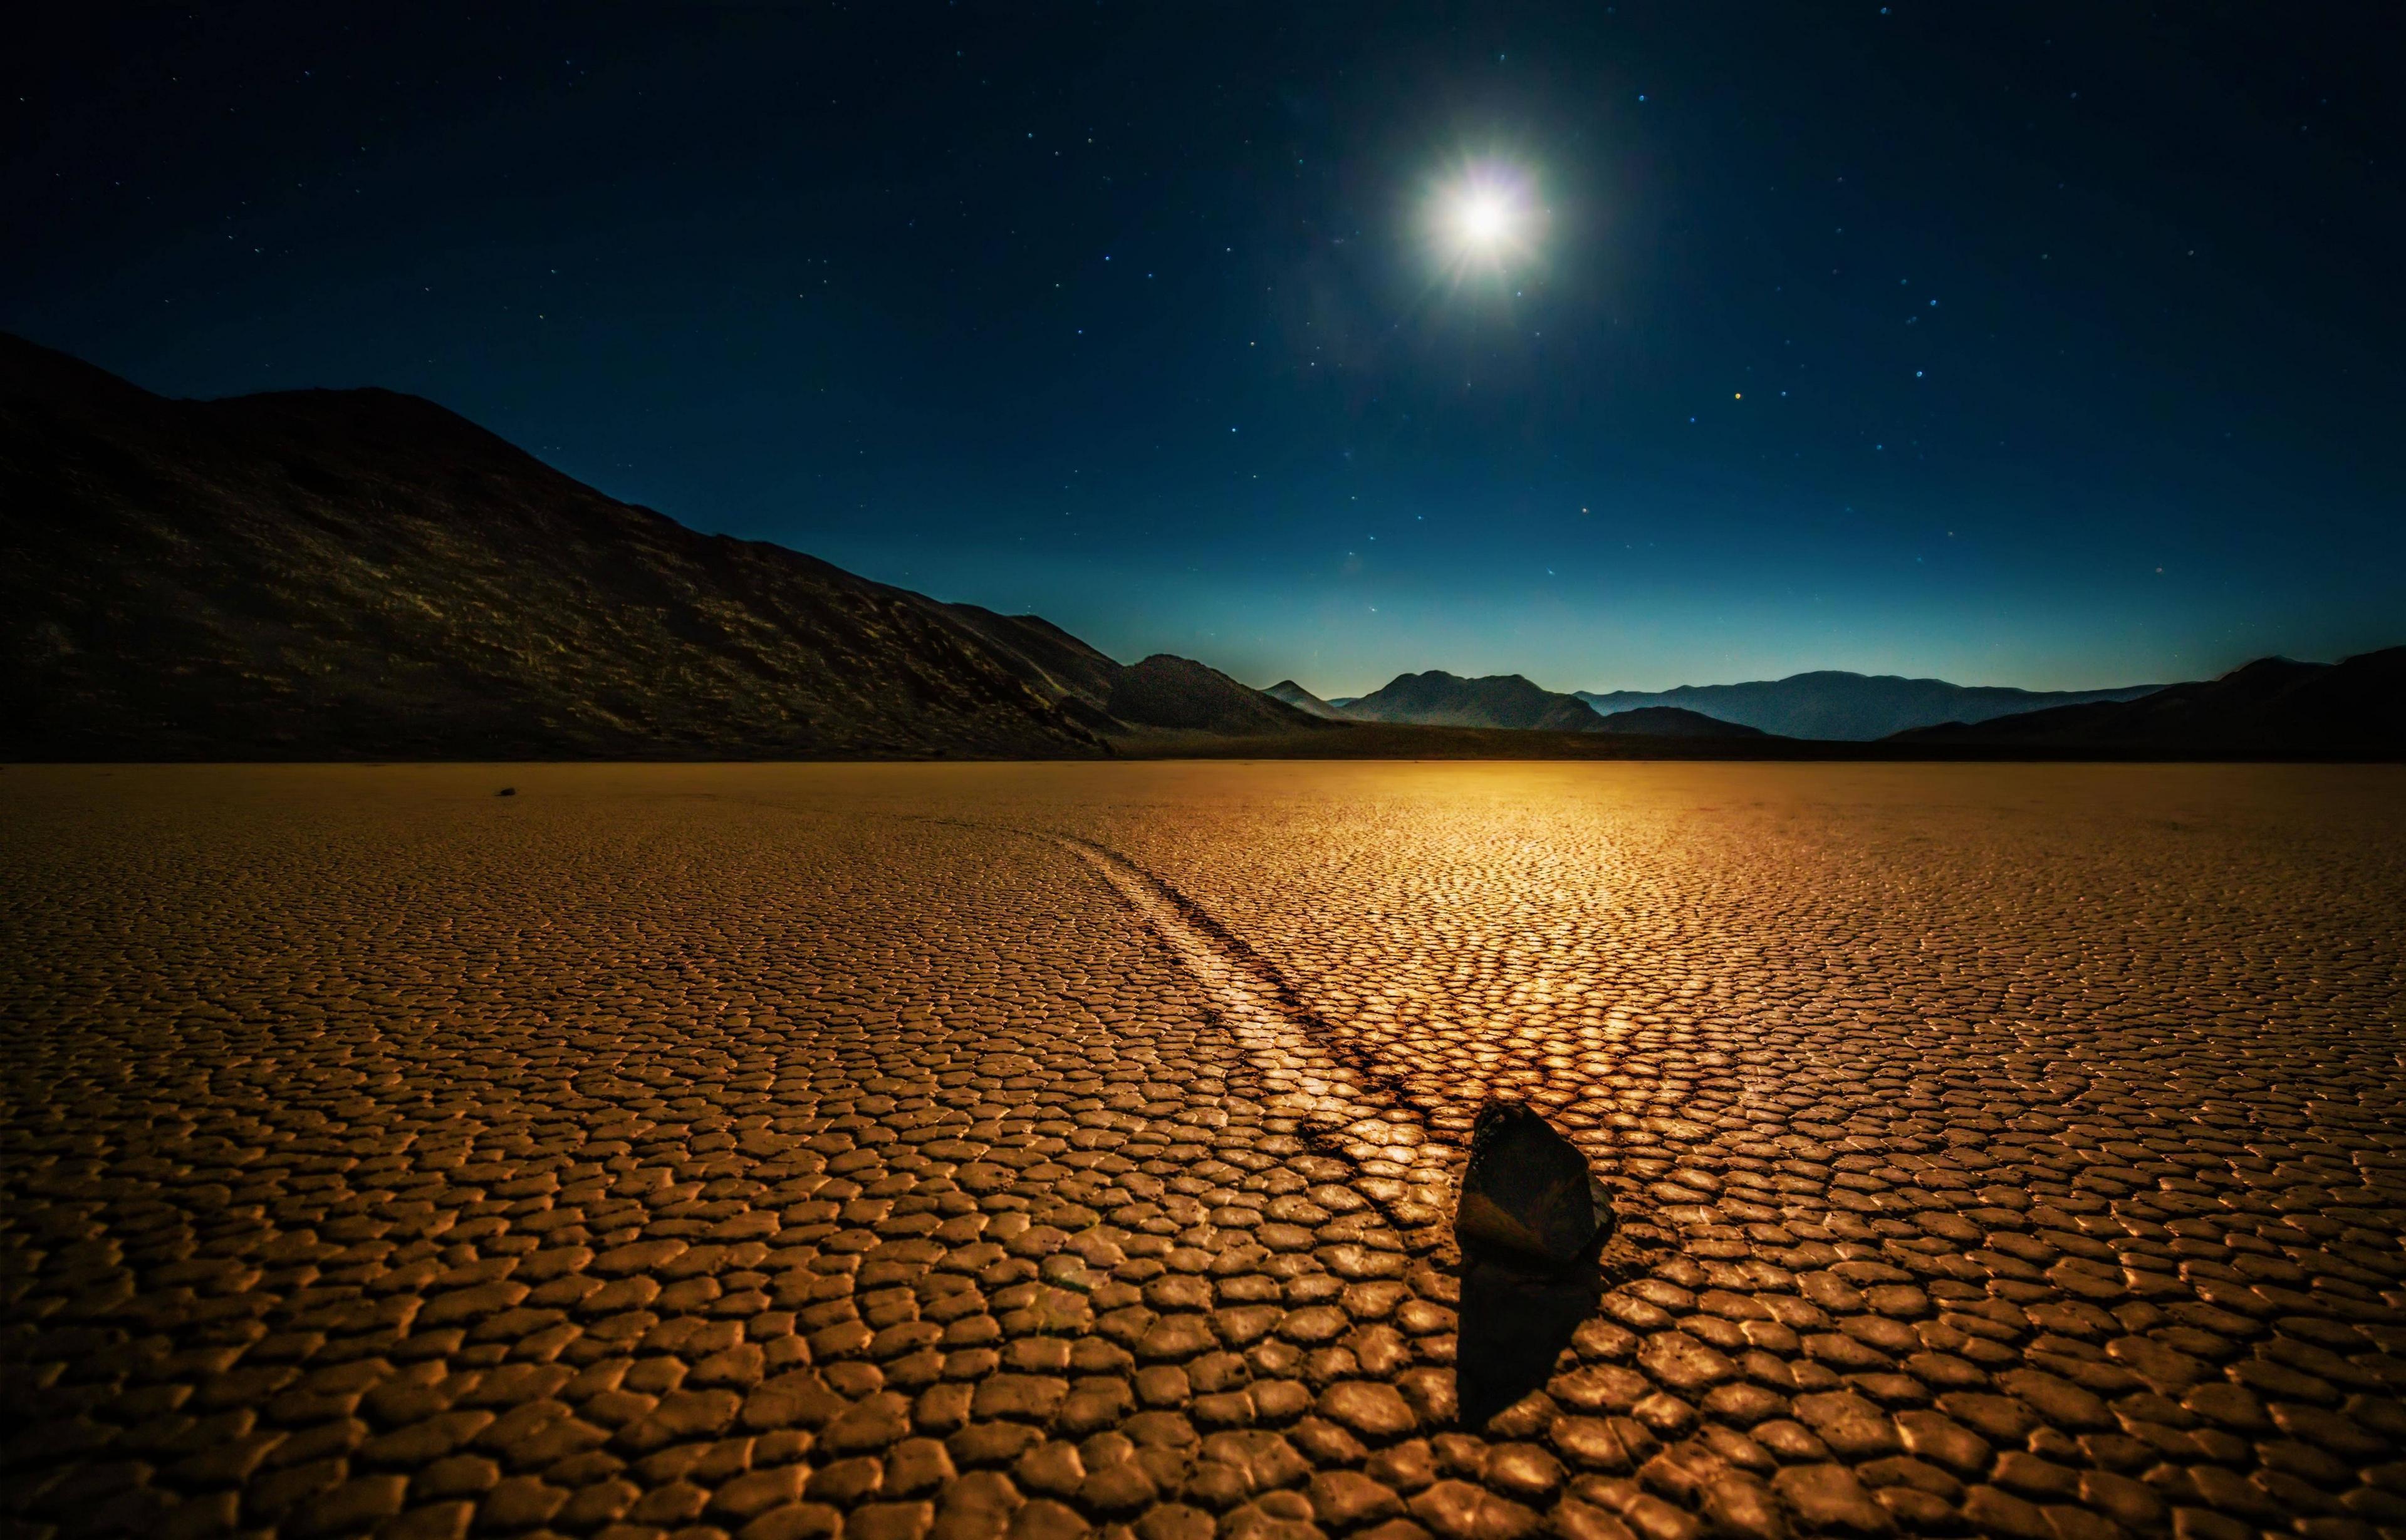 High resolution Death Valley HD 6400x4096 wallpaper for PC